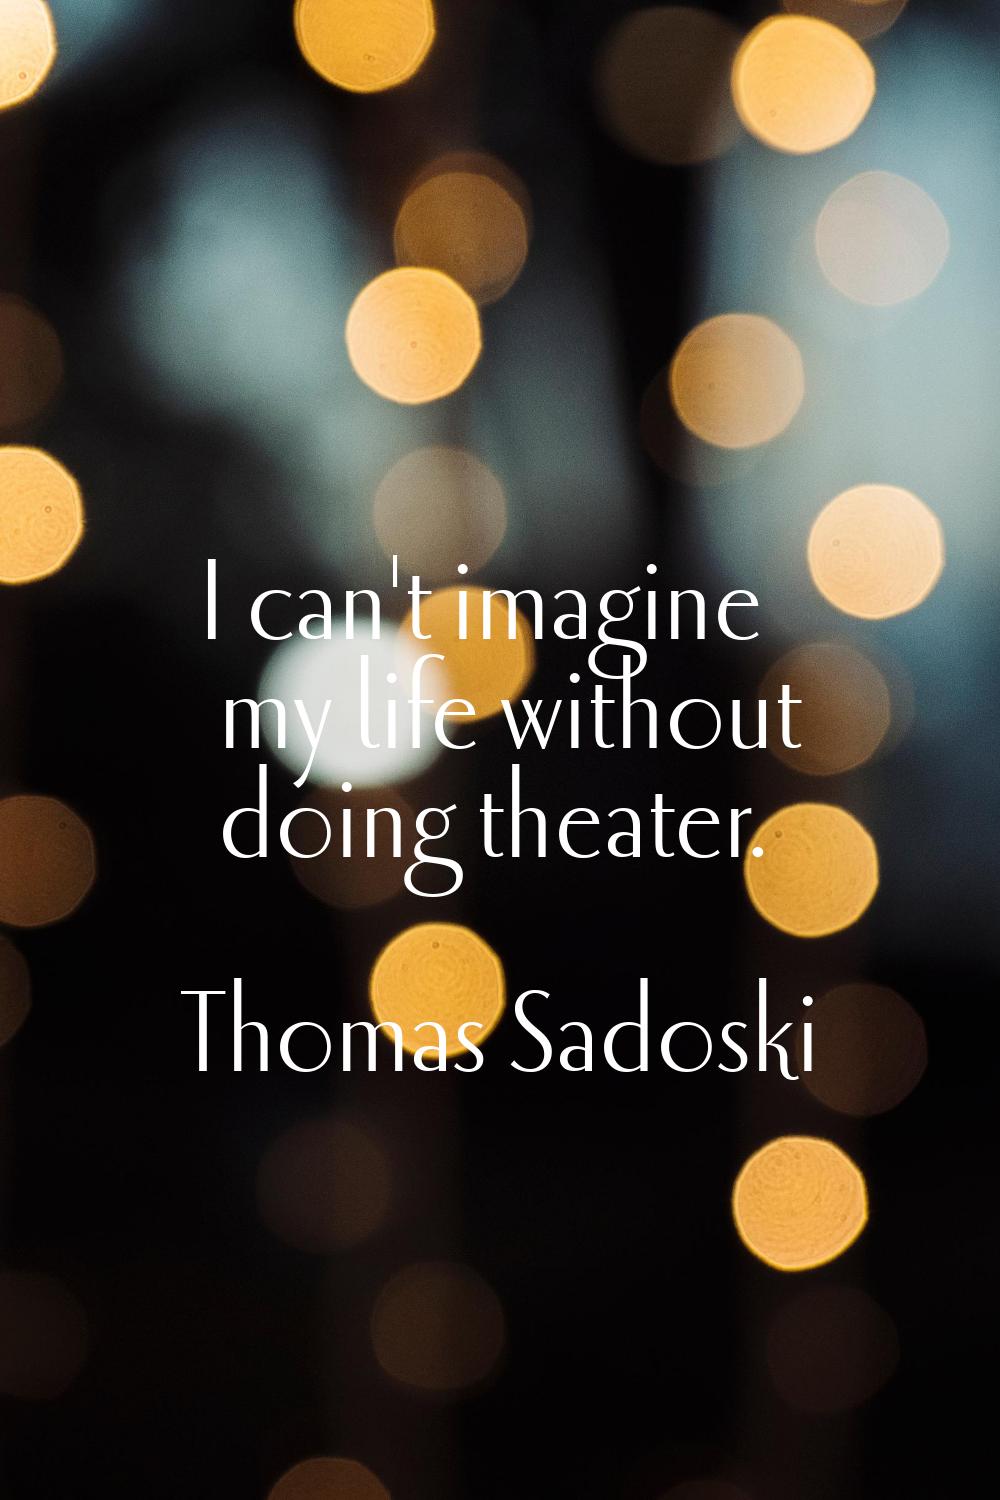 I can't imagine my life without doing theater.